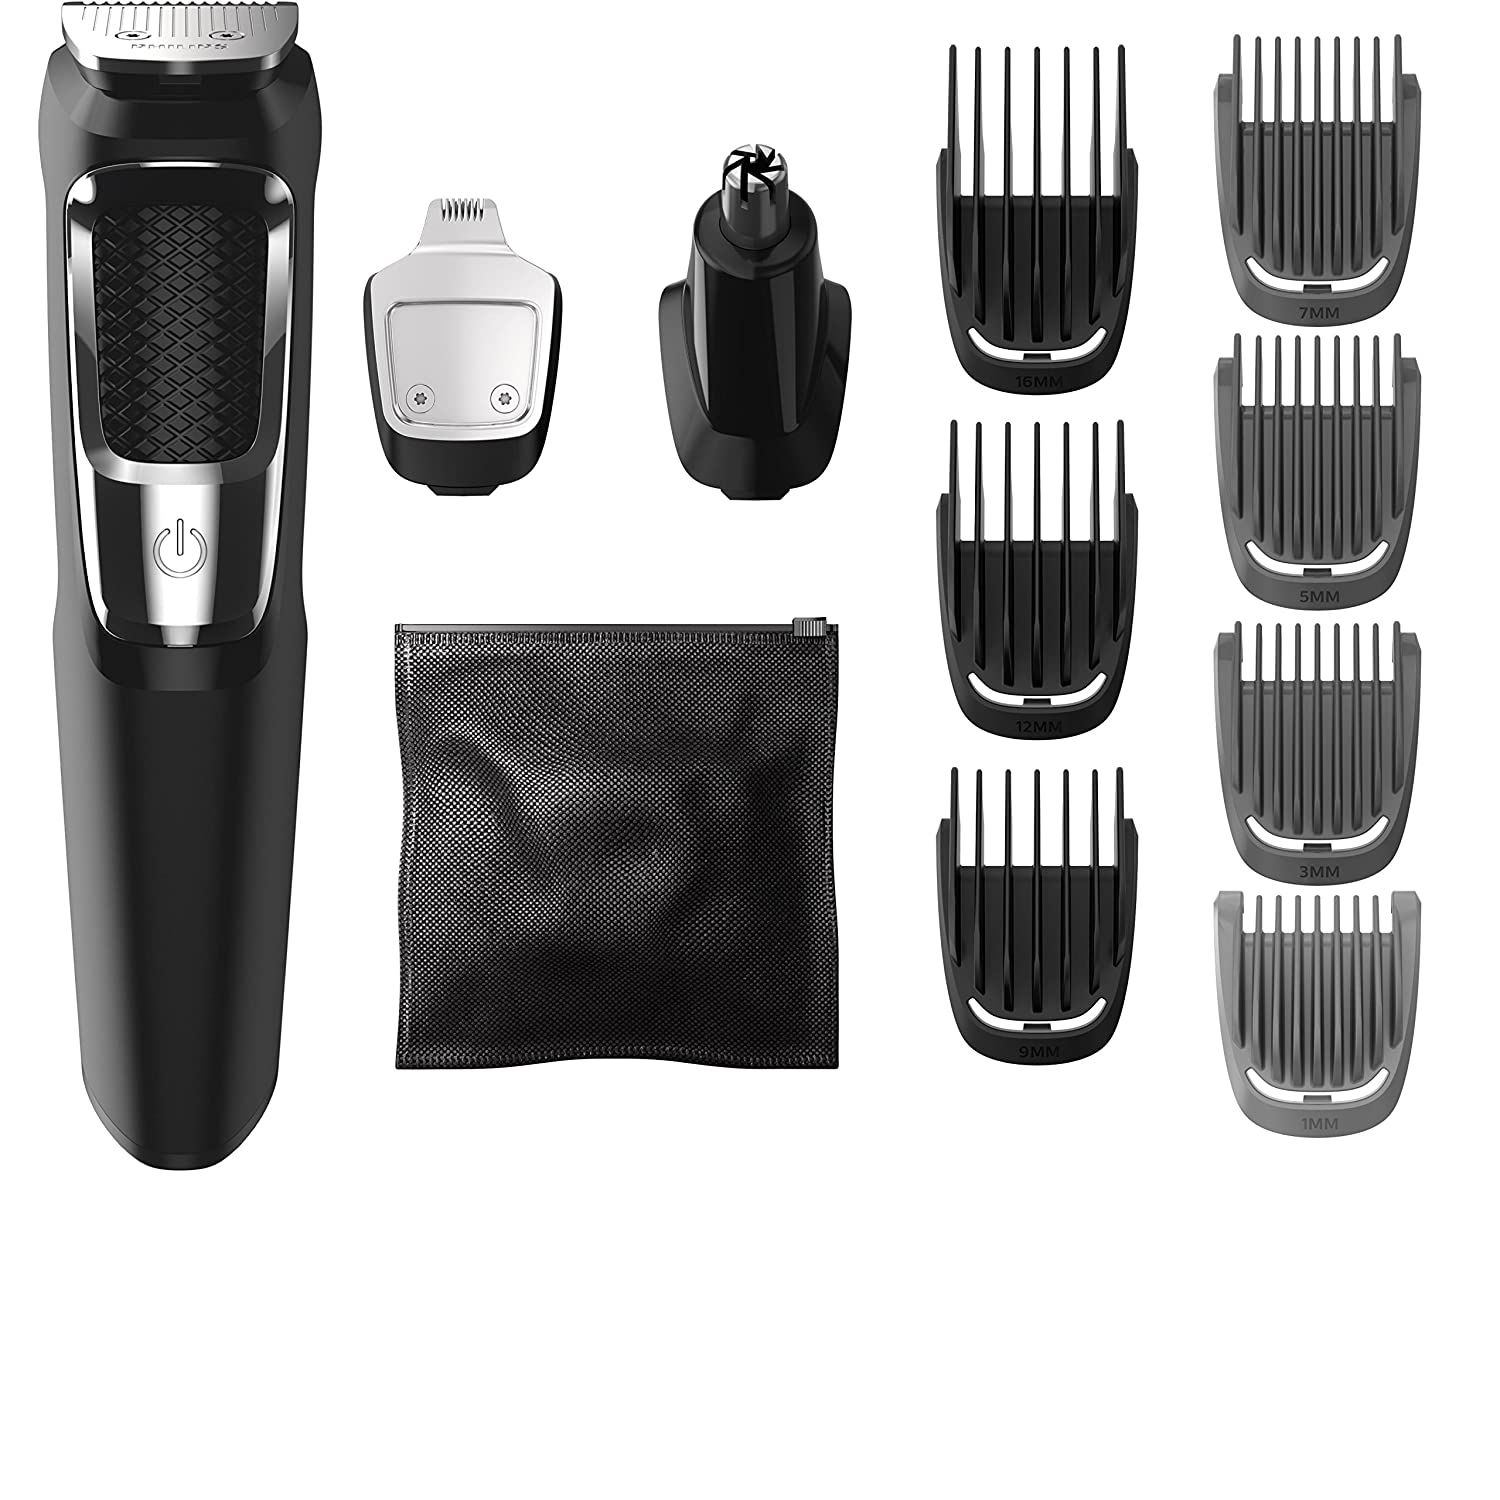 Philips Norelco MG3750 Multigroom All-In-One Series 3000, 13 attachment trimmer | Amazon (US)